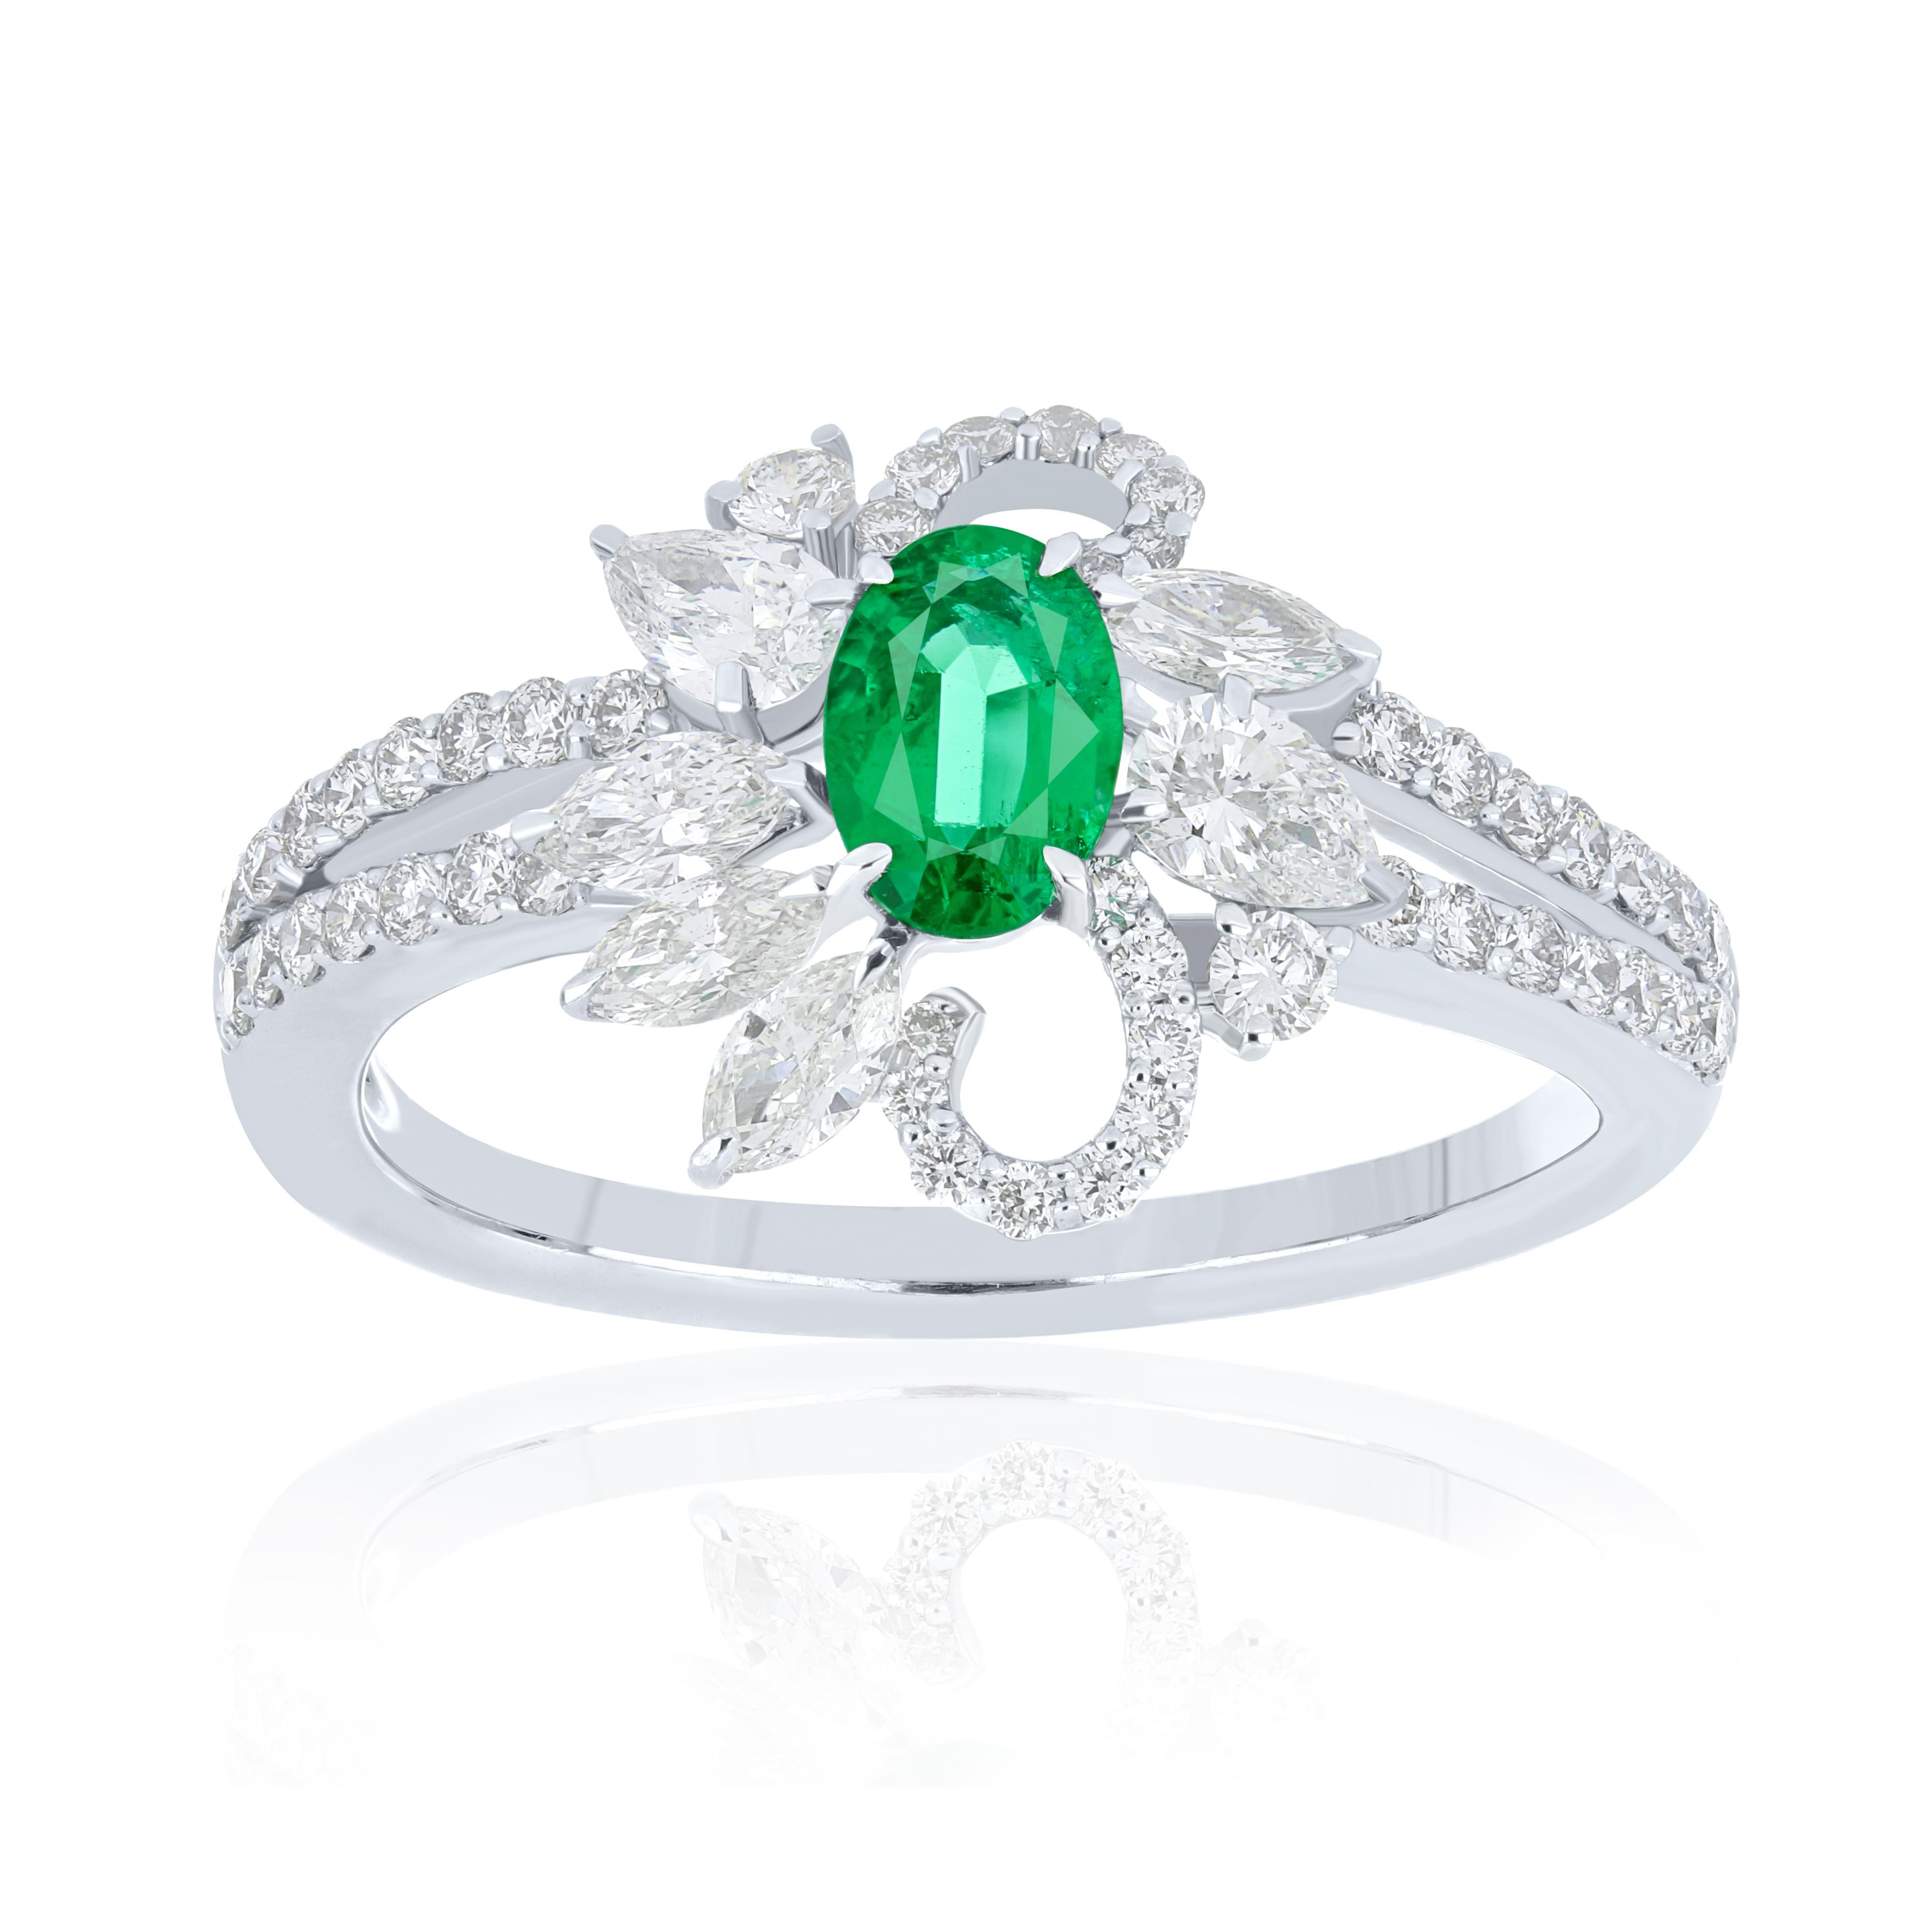 Elegant and exquisitely detailed 18 Karat White Gold Ring, center set with 0.40 Cts .Oval Shape Emerald and micro pave set Diamonds, weighing approx. 0.91 Cts Beautifully Hand crafted in 18 Karat White Gold.

Stone Detail:
Emerald: 6x4MM

Stone